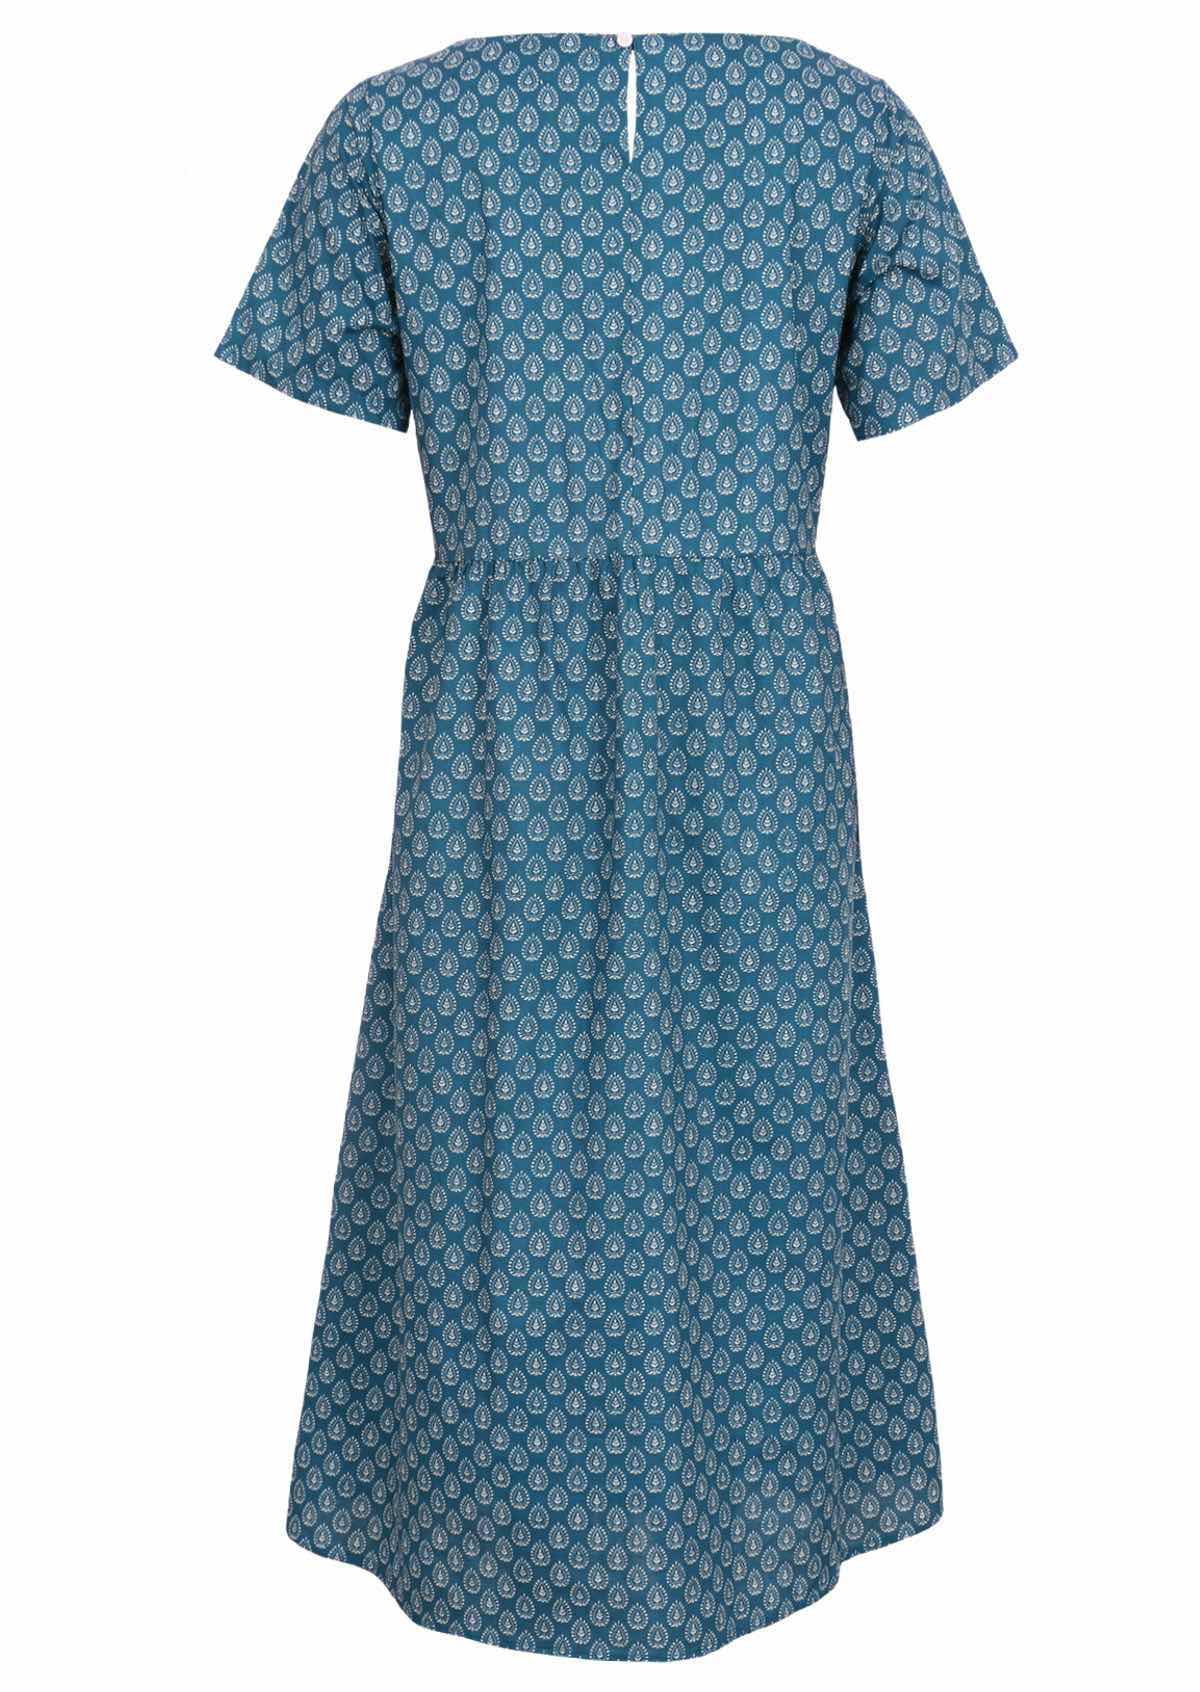 cotton dress with button at nape of neck